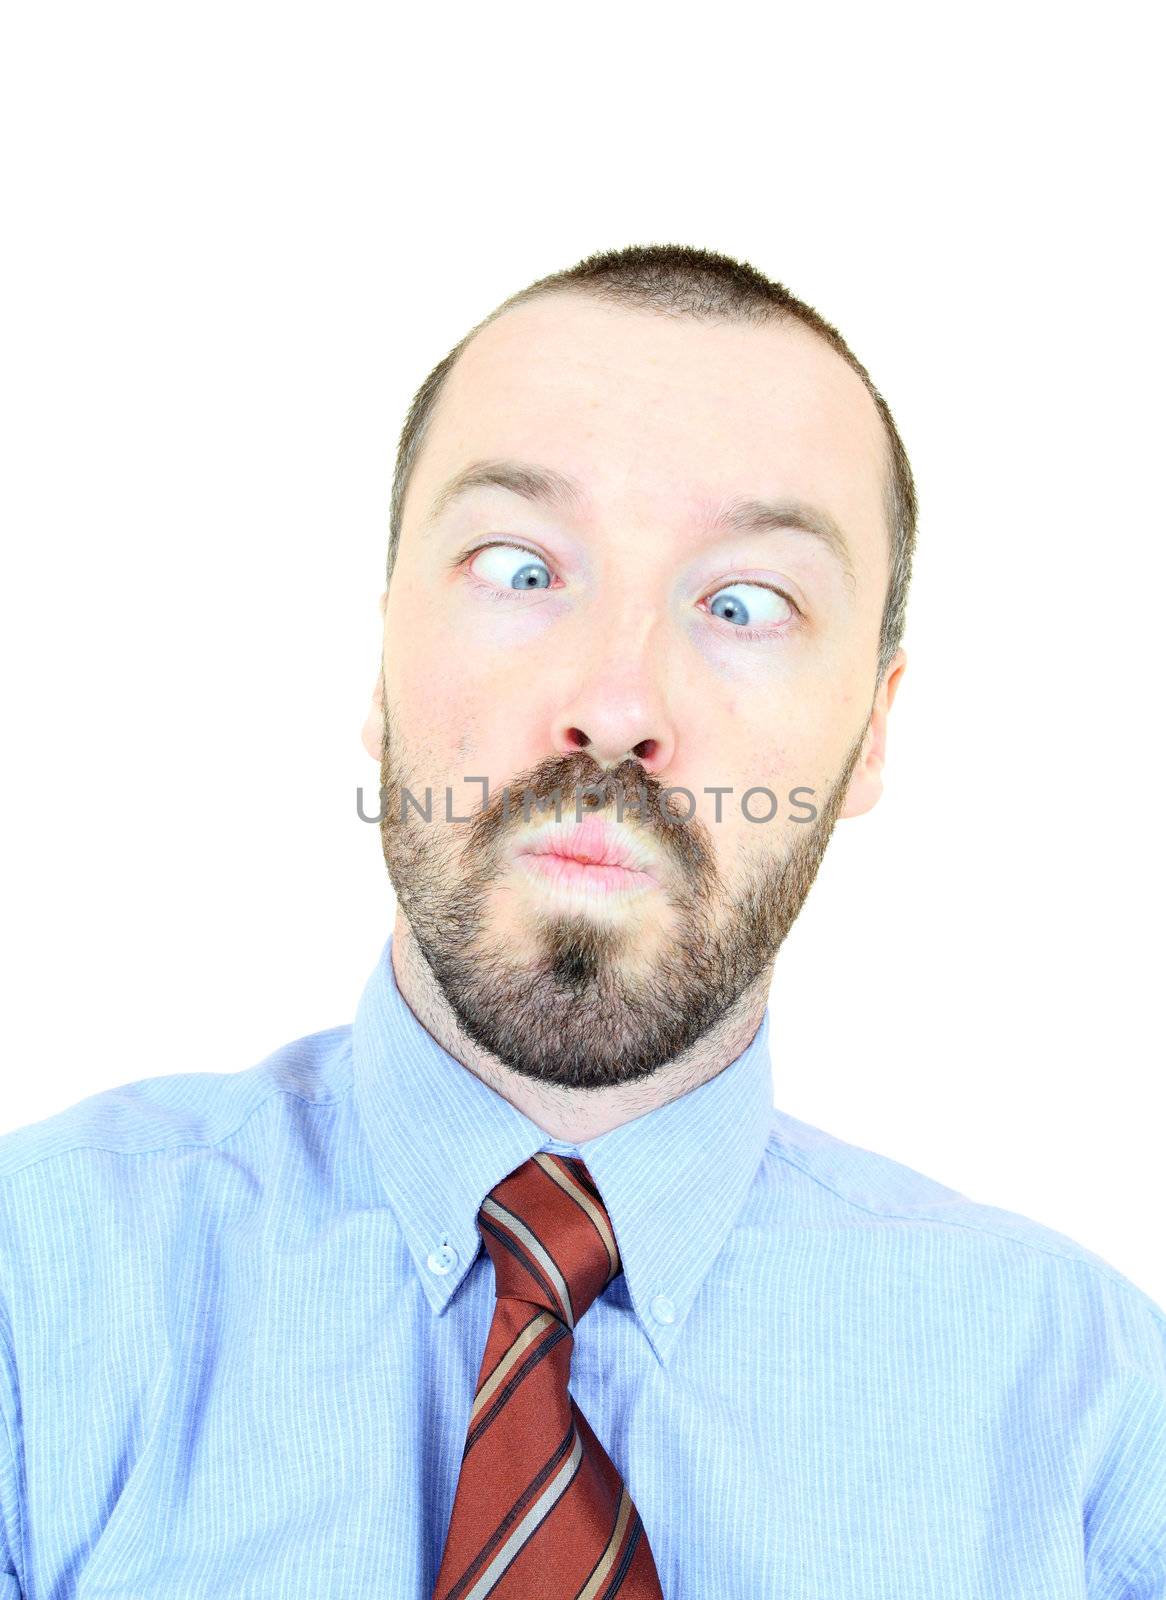 Silly businessman pulling faces and squinting eyes. Young adult near his 30s - portrait isolated against white background. Short-haired male.